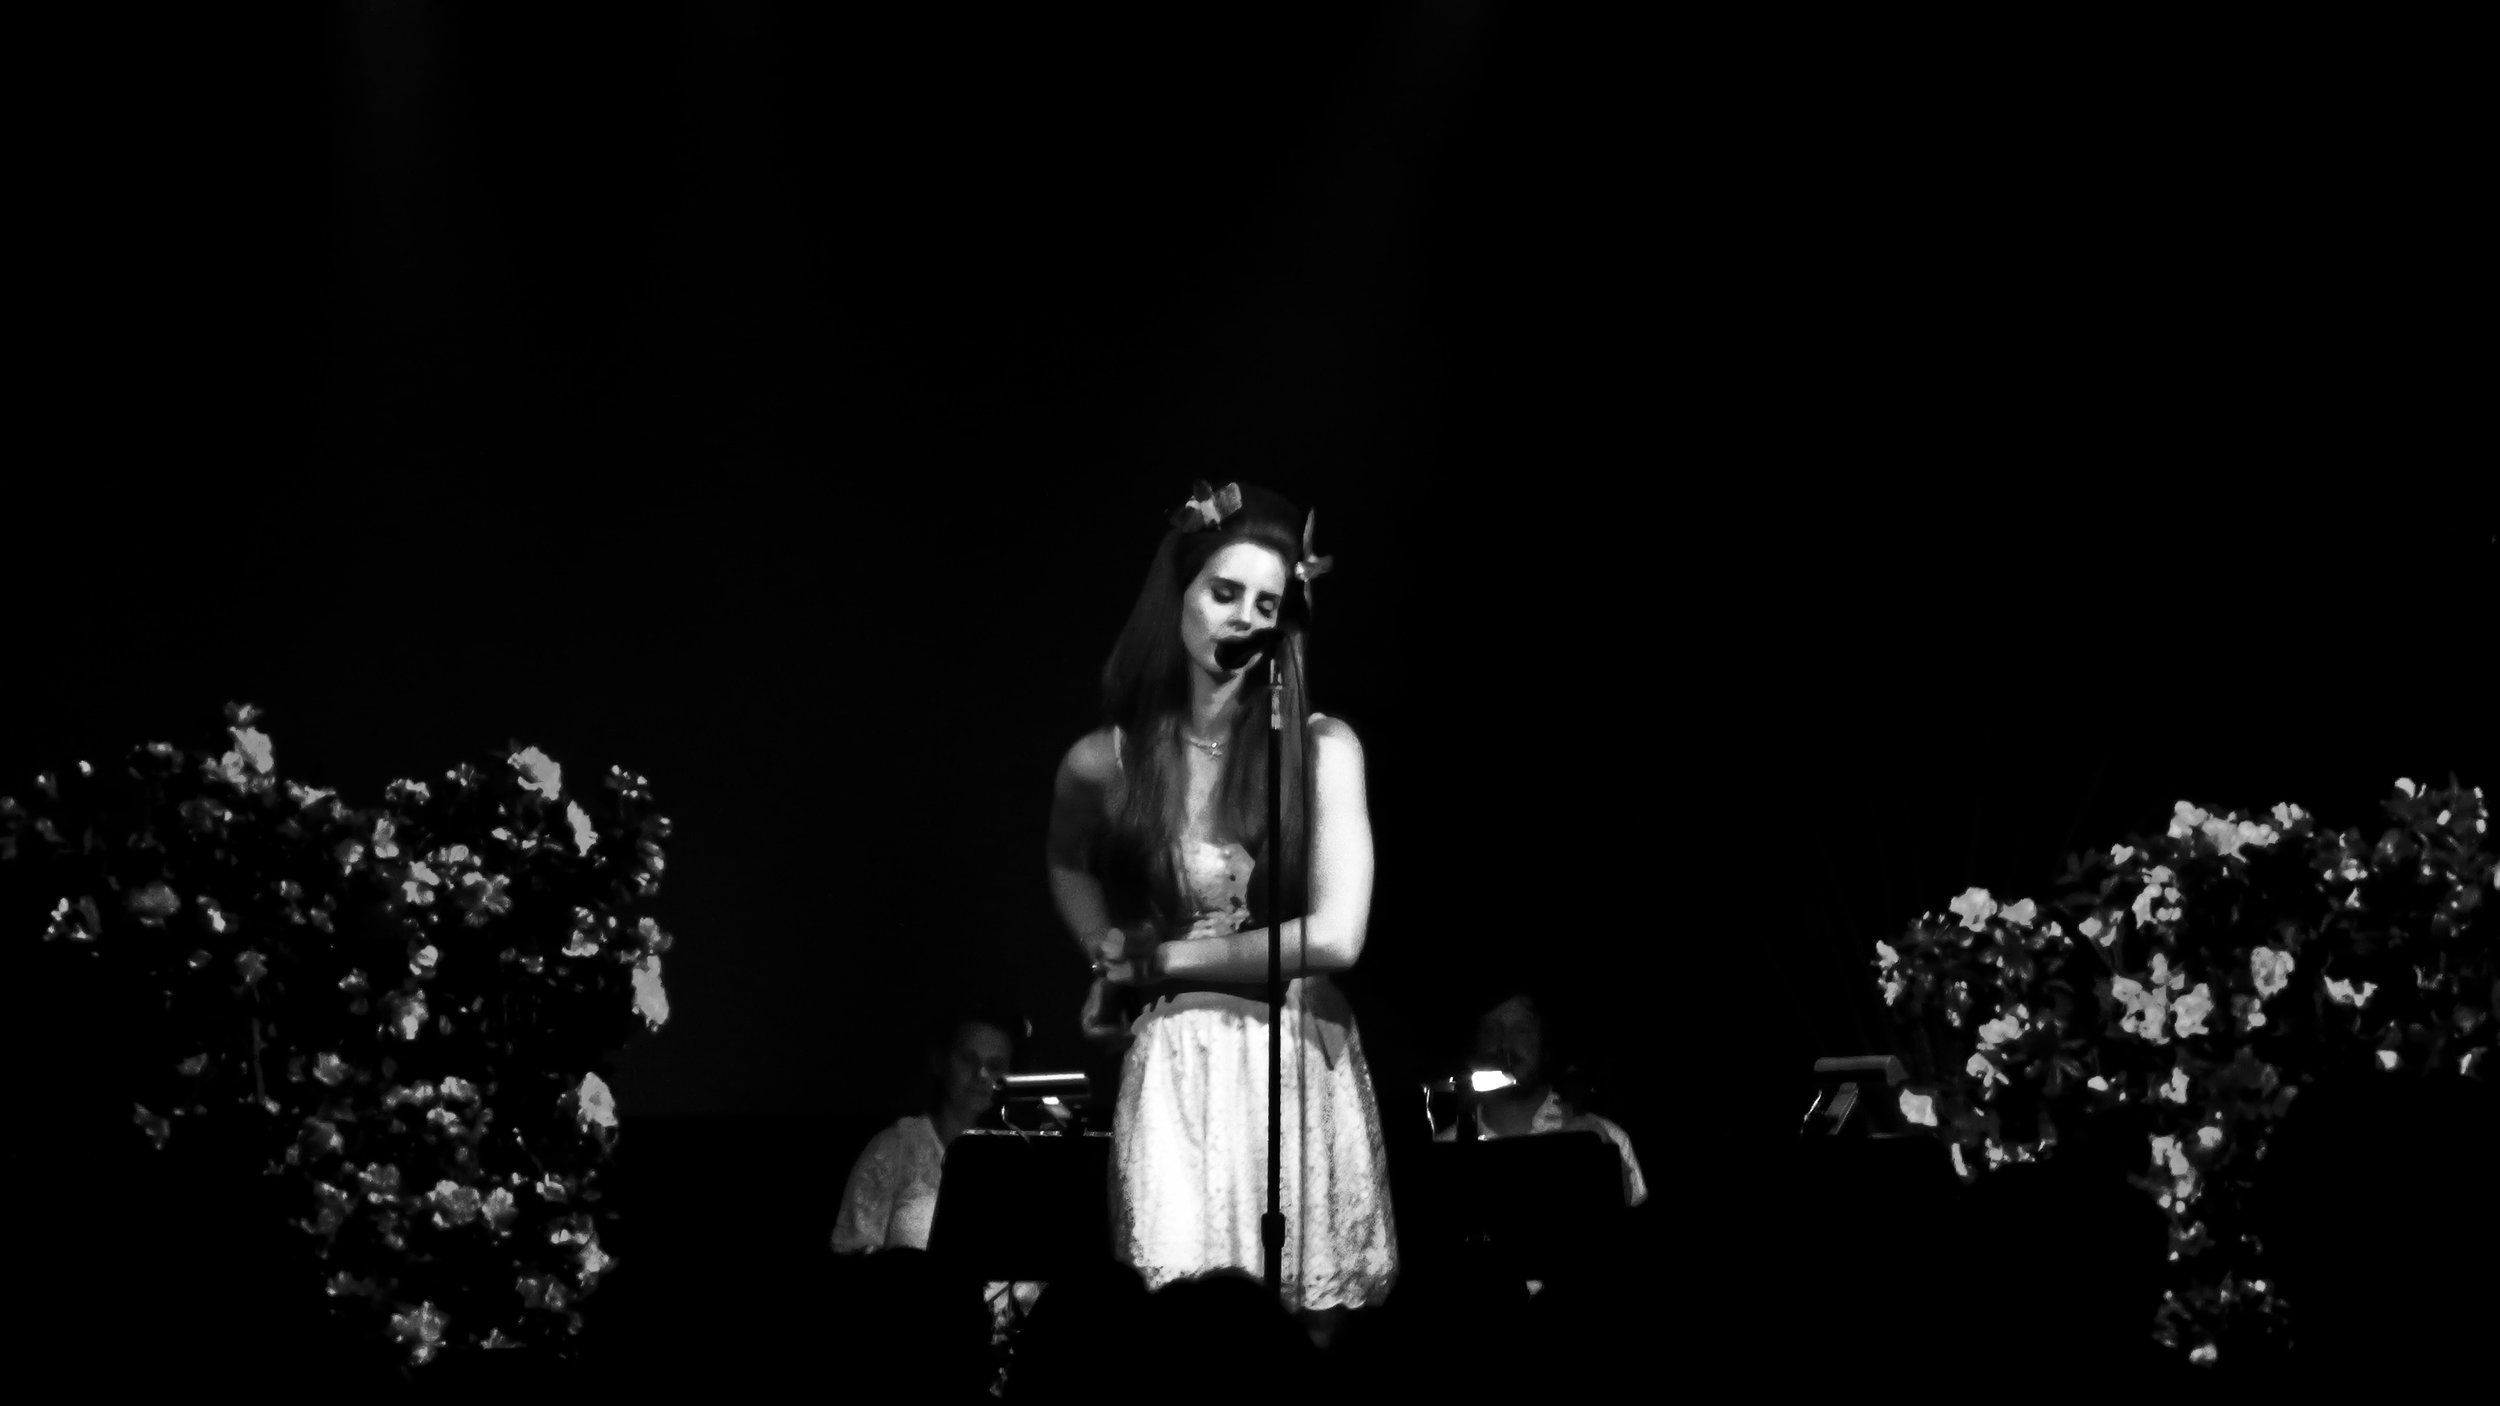 A woman singing on stage in black and white - Lana Del Rey